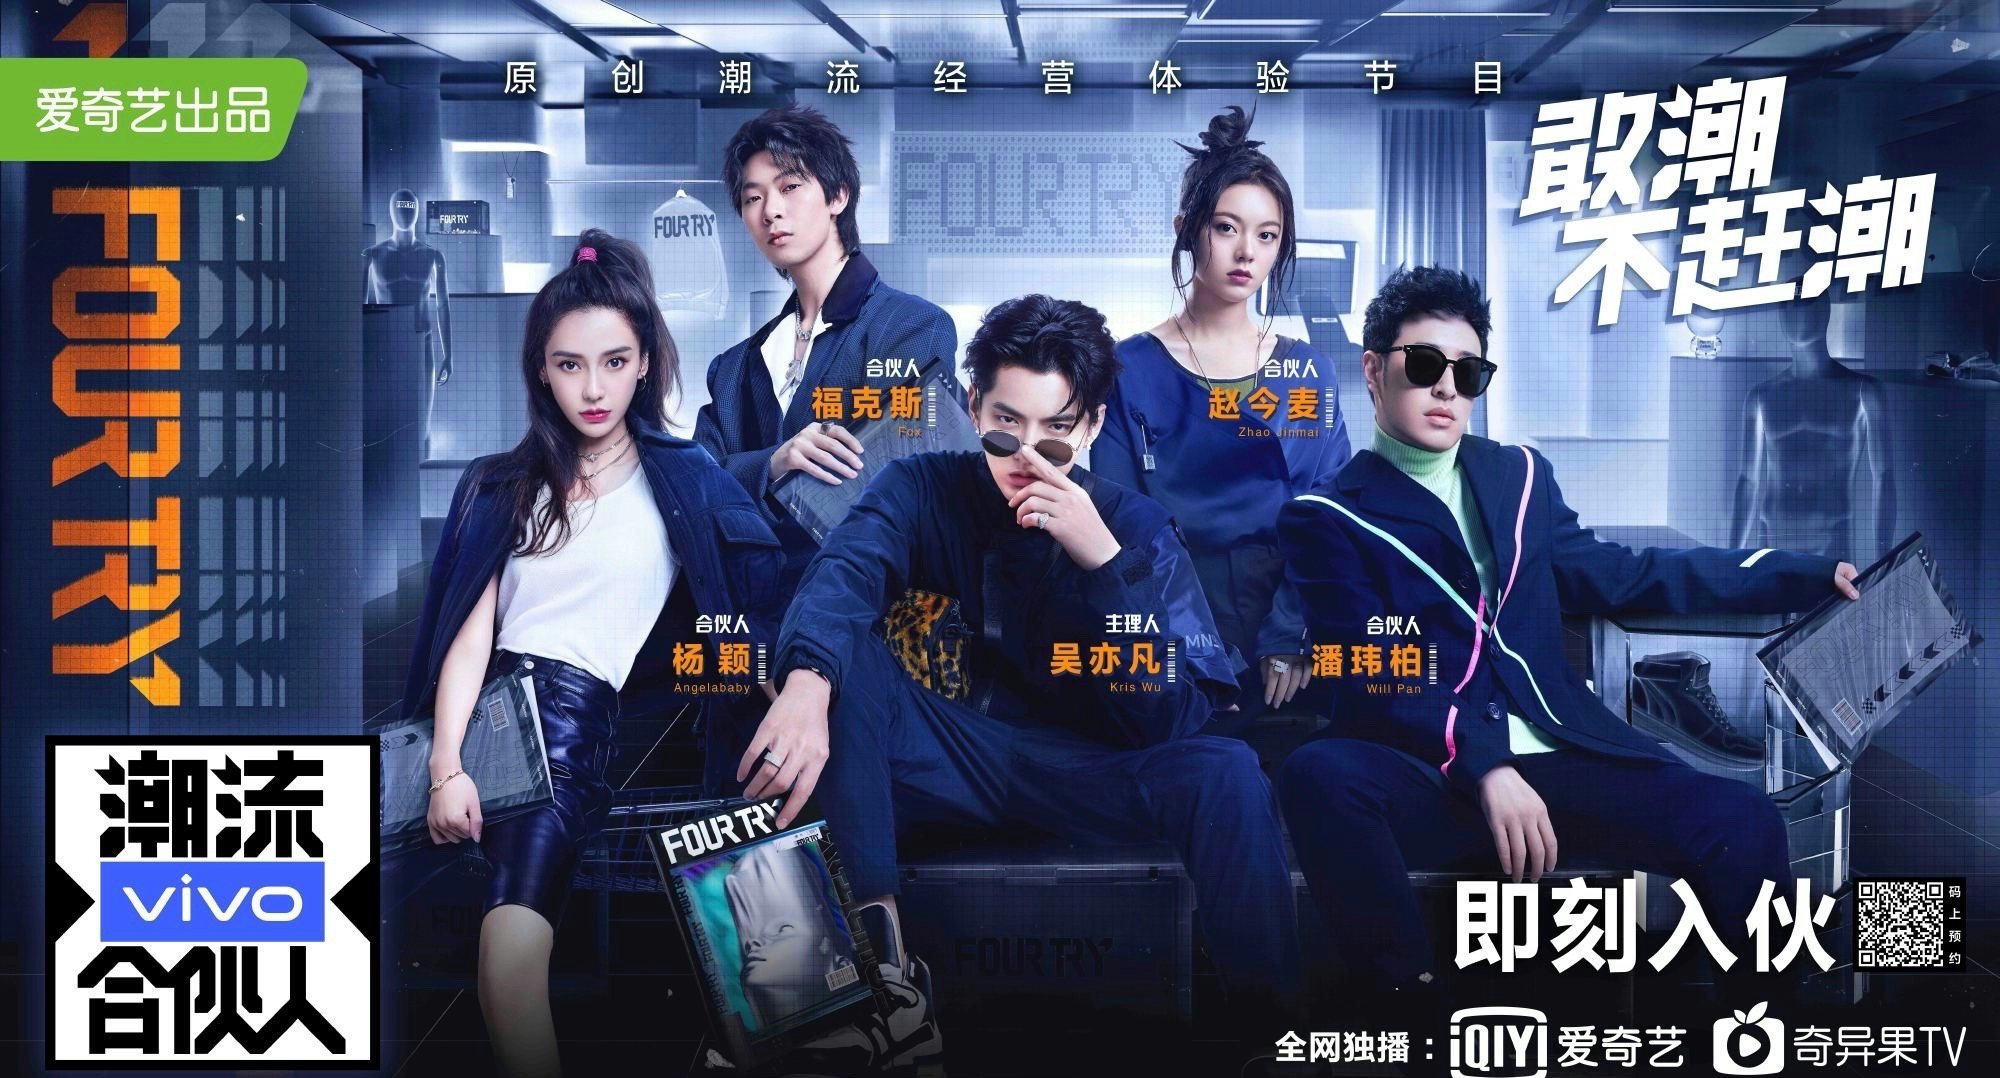 iQiyi intends to enforce the influence of Chinese pop culture and facilitate the monetization of idol economy through this new reality show. Courtesy of Fourtry. 